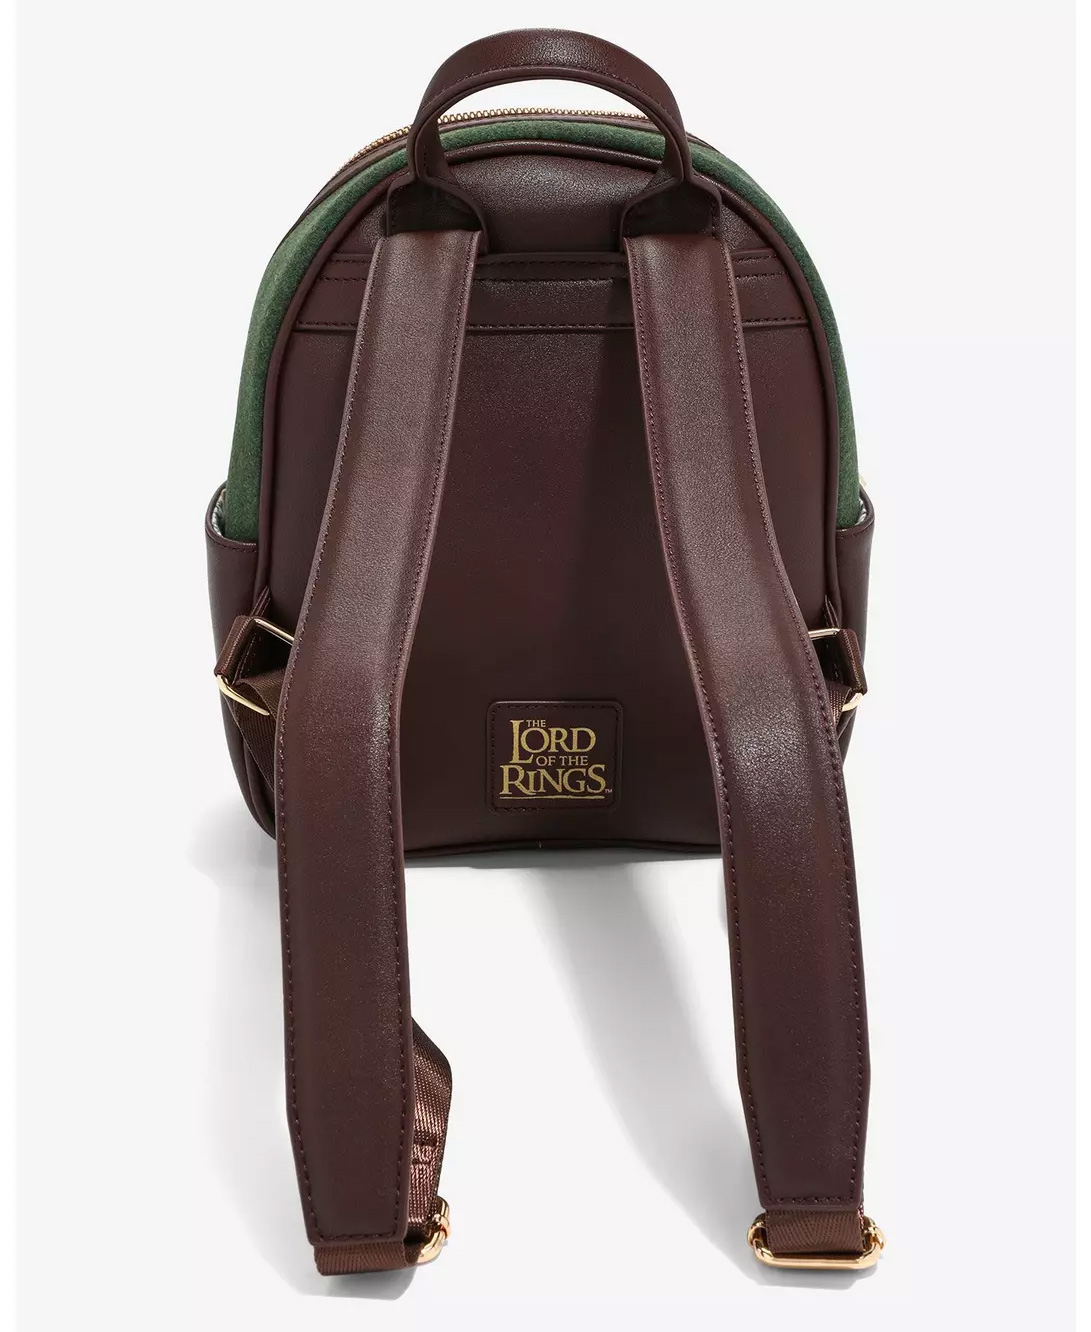 Frodo Baggins The Lord of the Rings Mini-Backpack